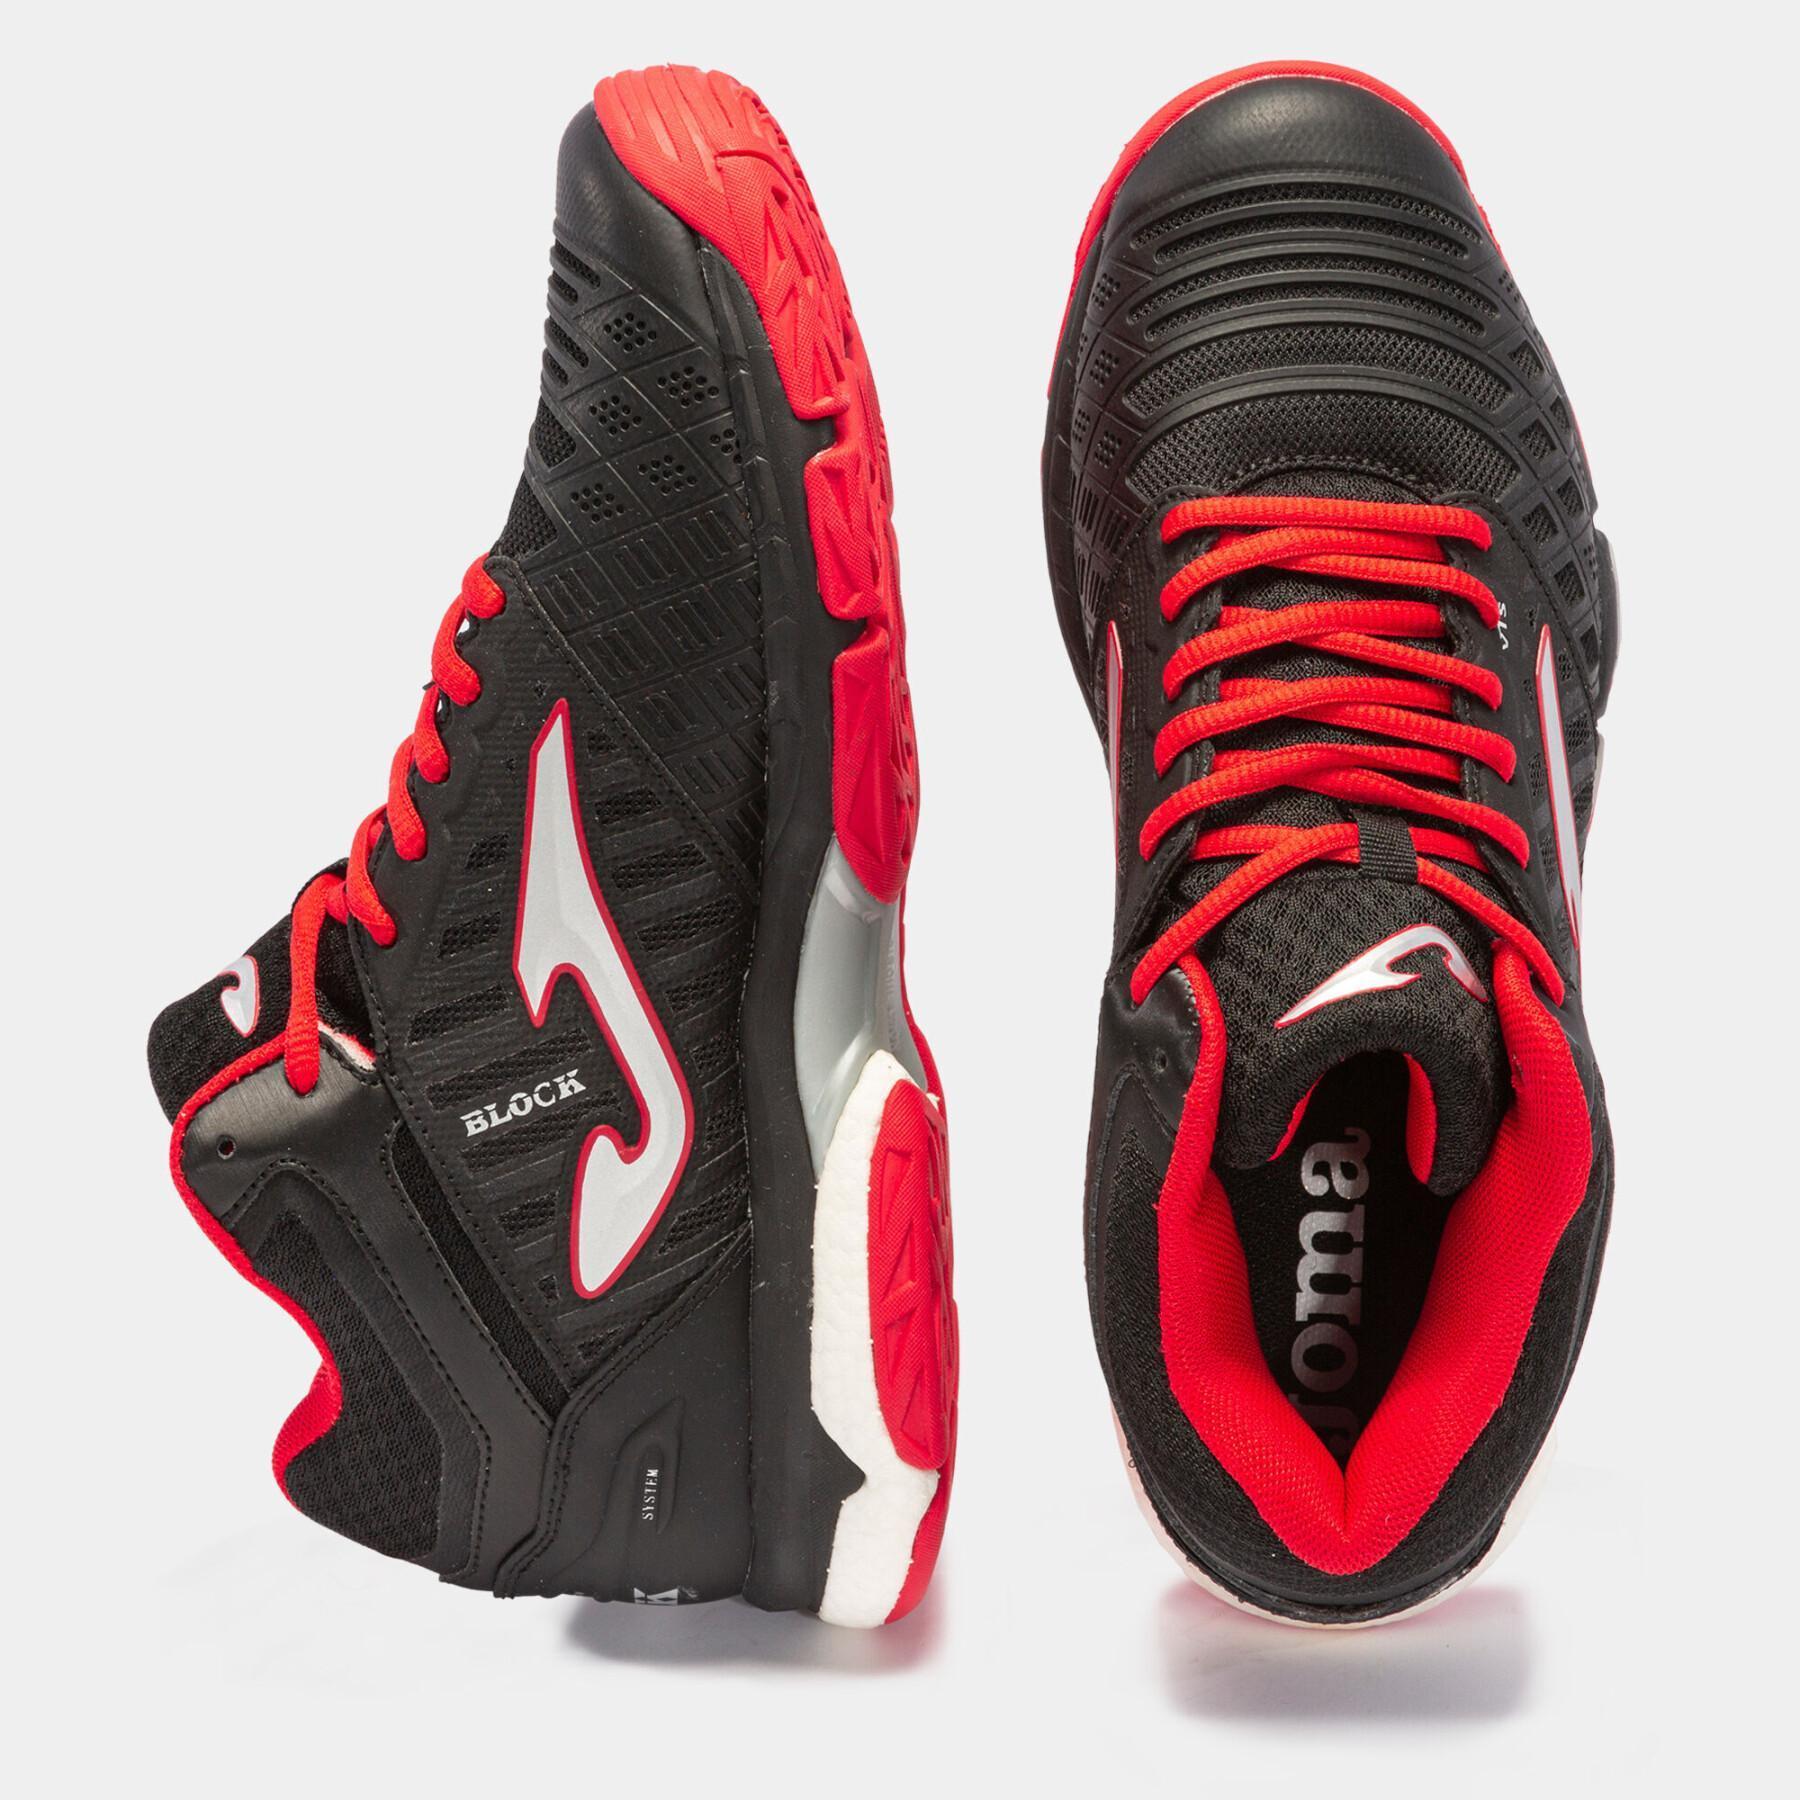 Chaussures de volleyball Joma V.Block 2301